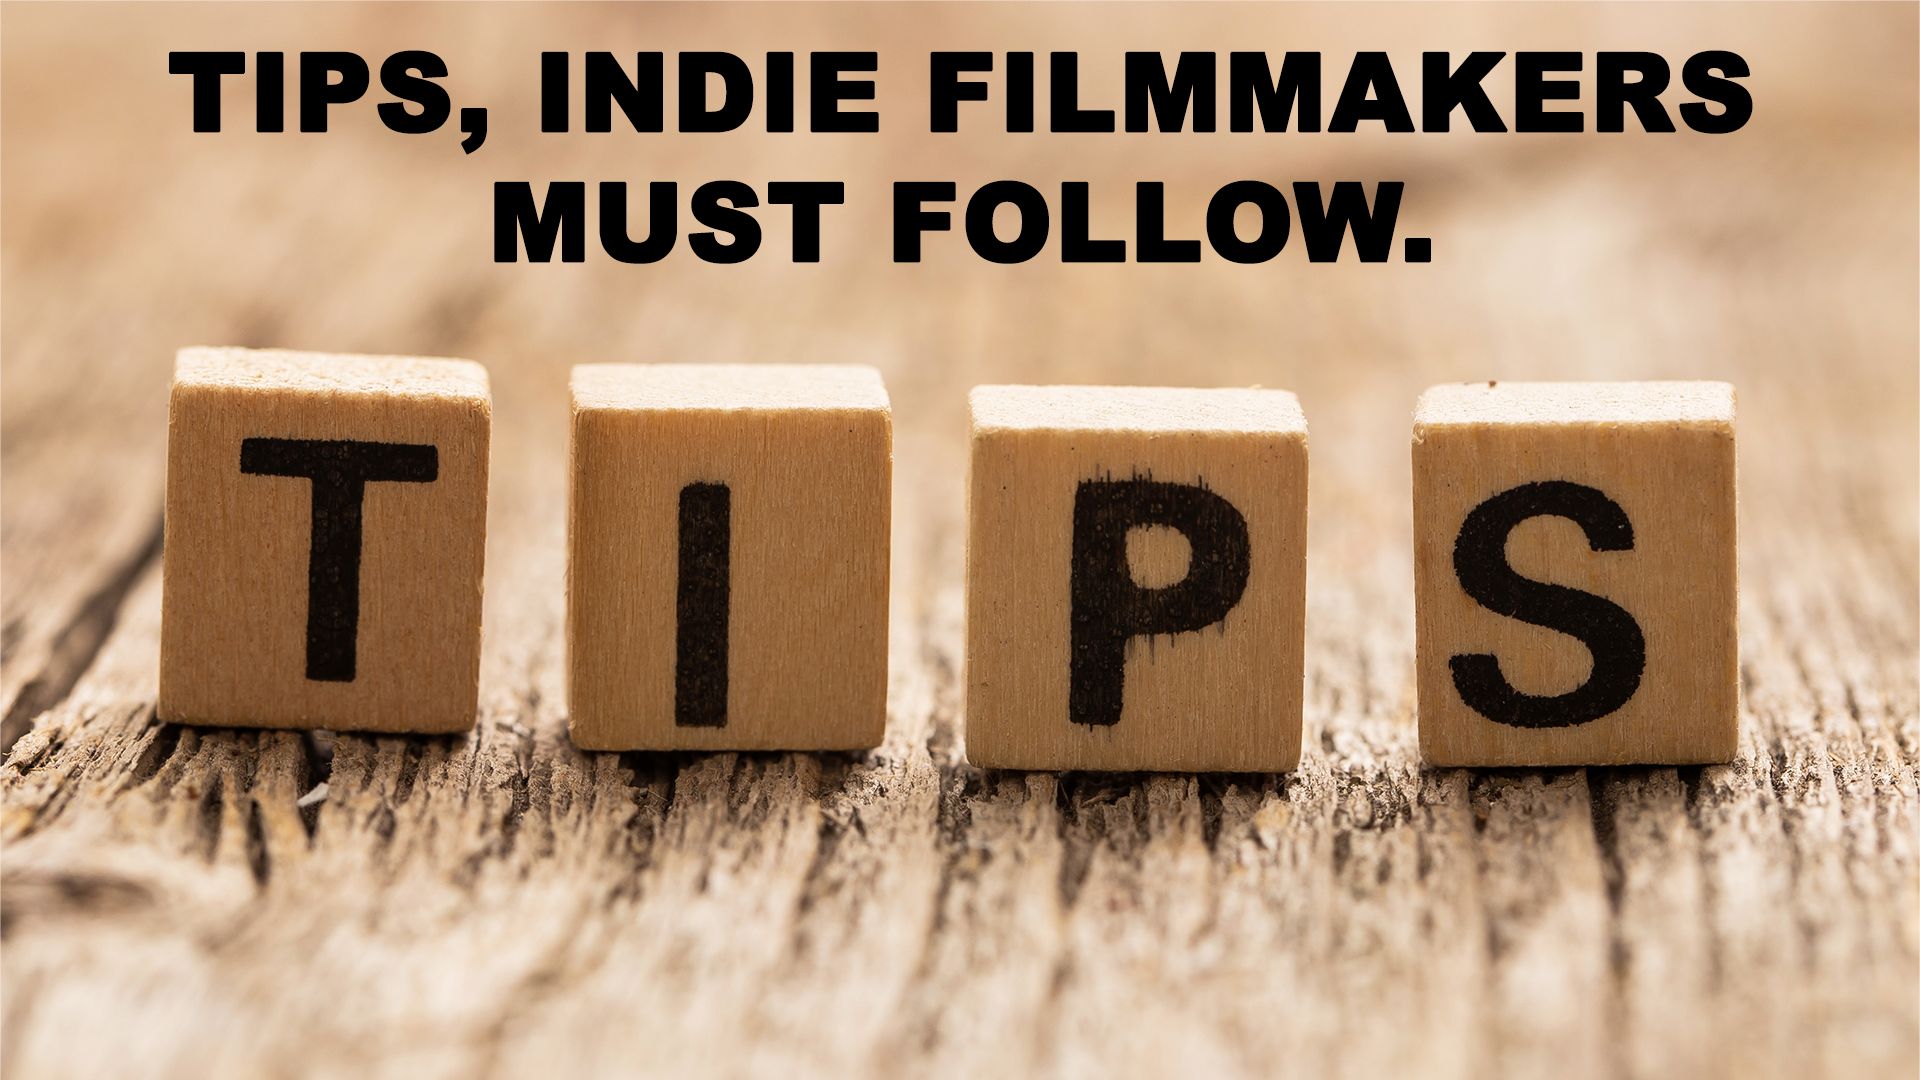 Are you an Indie Filmmaker? Then you need to read this.